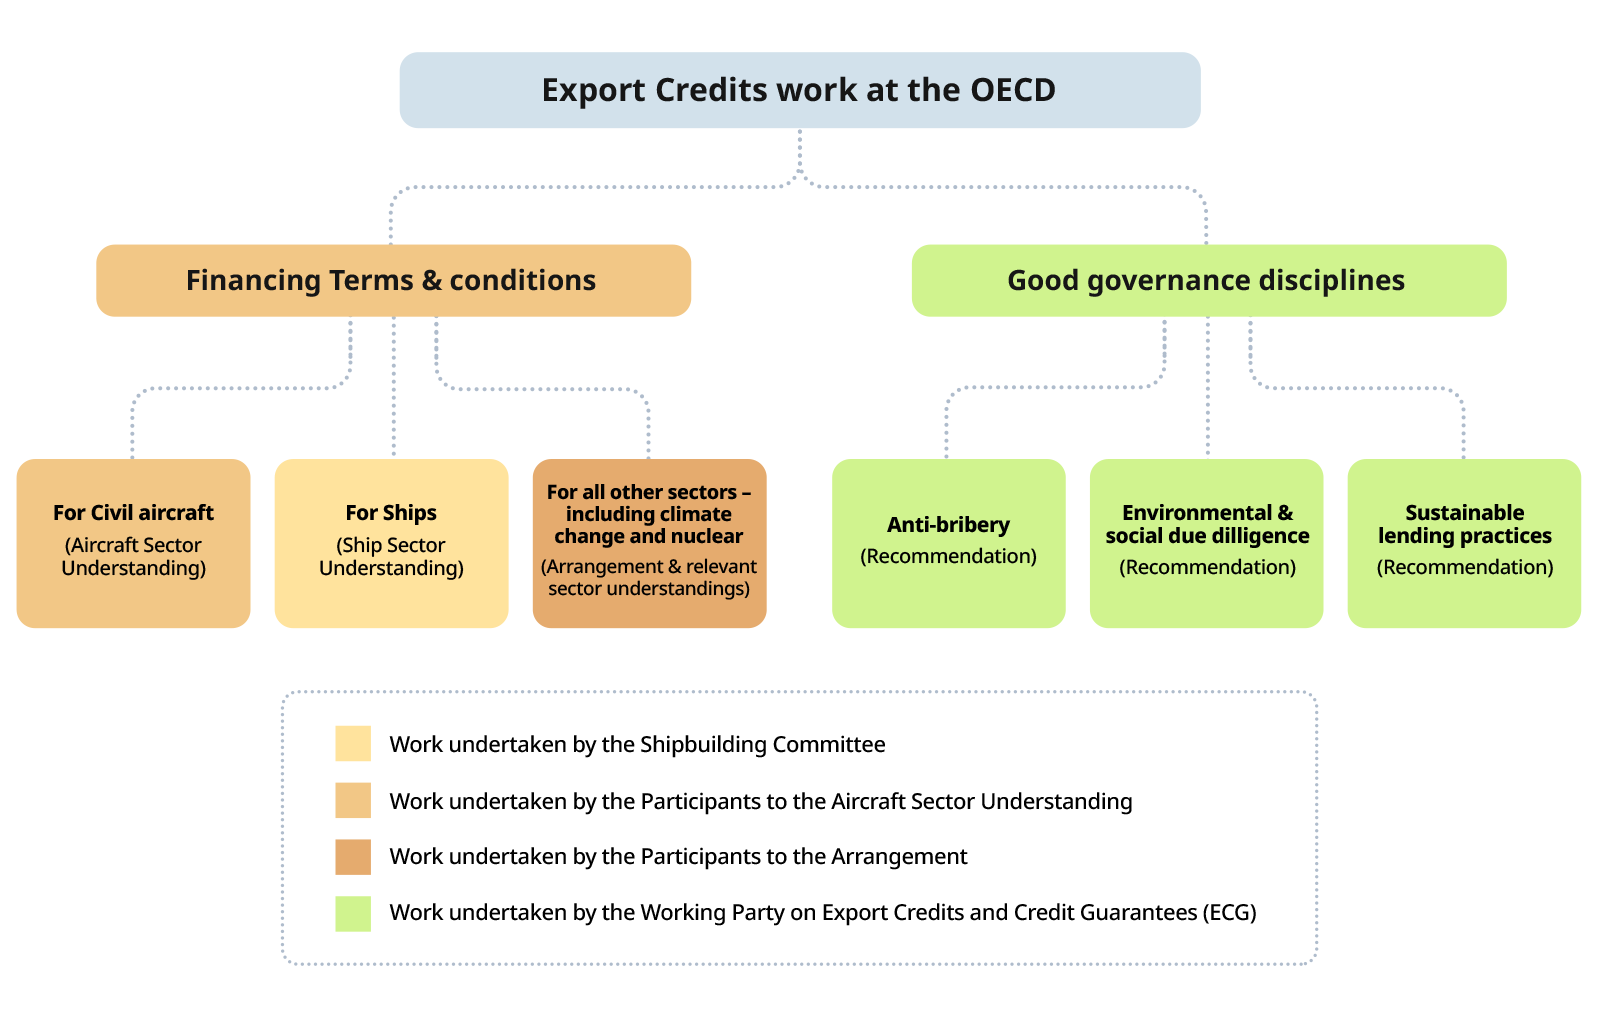 Export Credits work at OECD